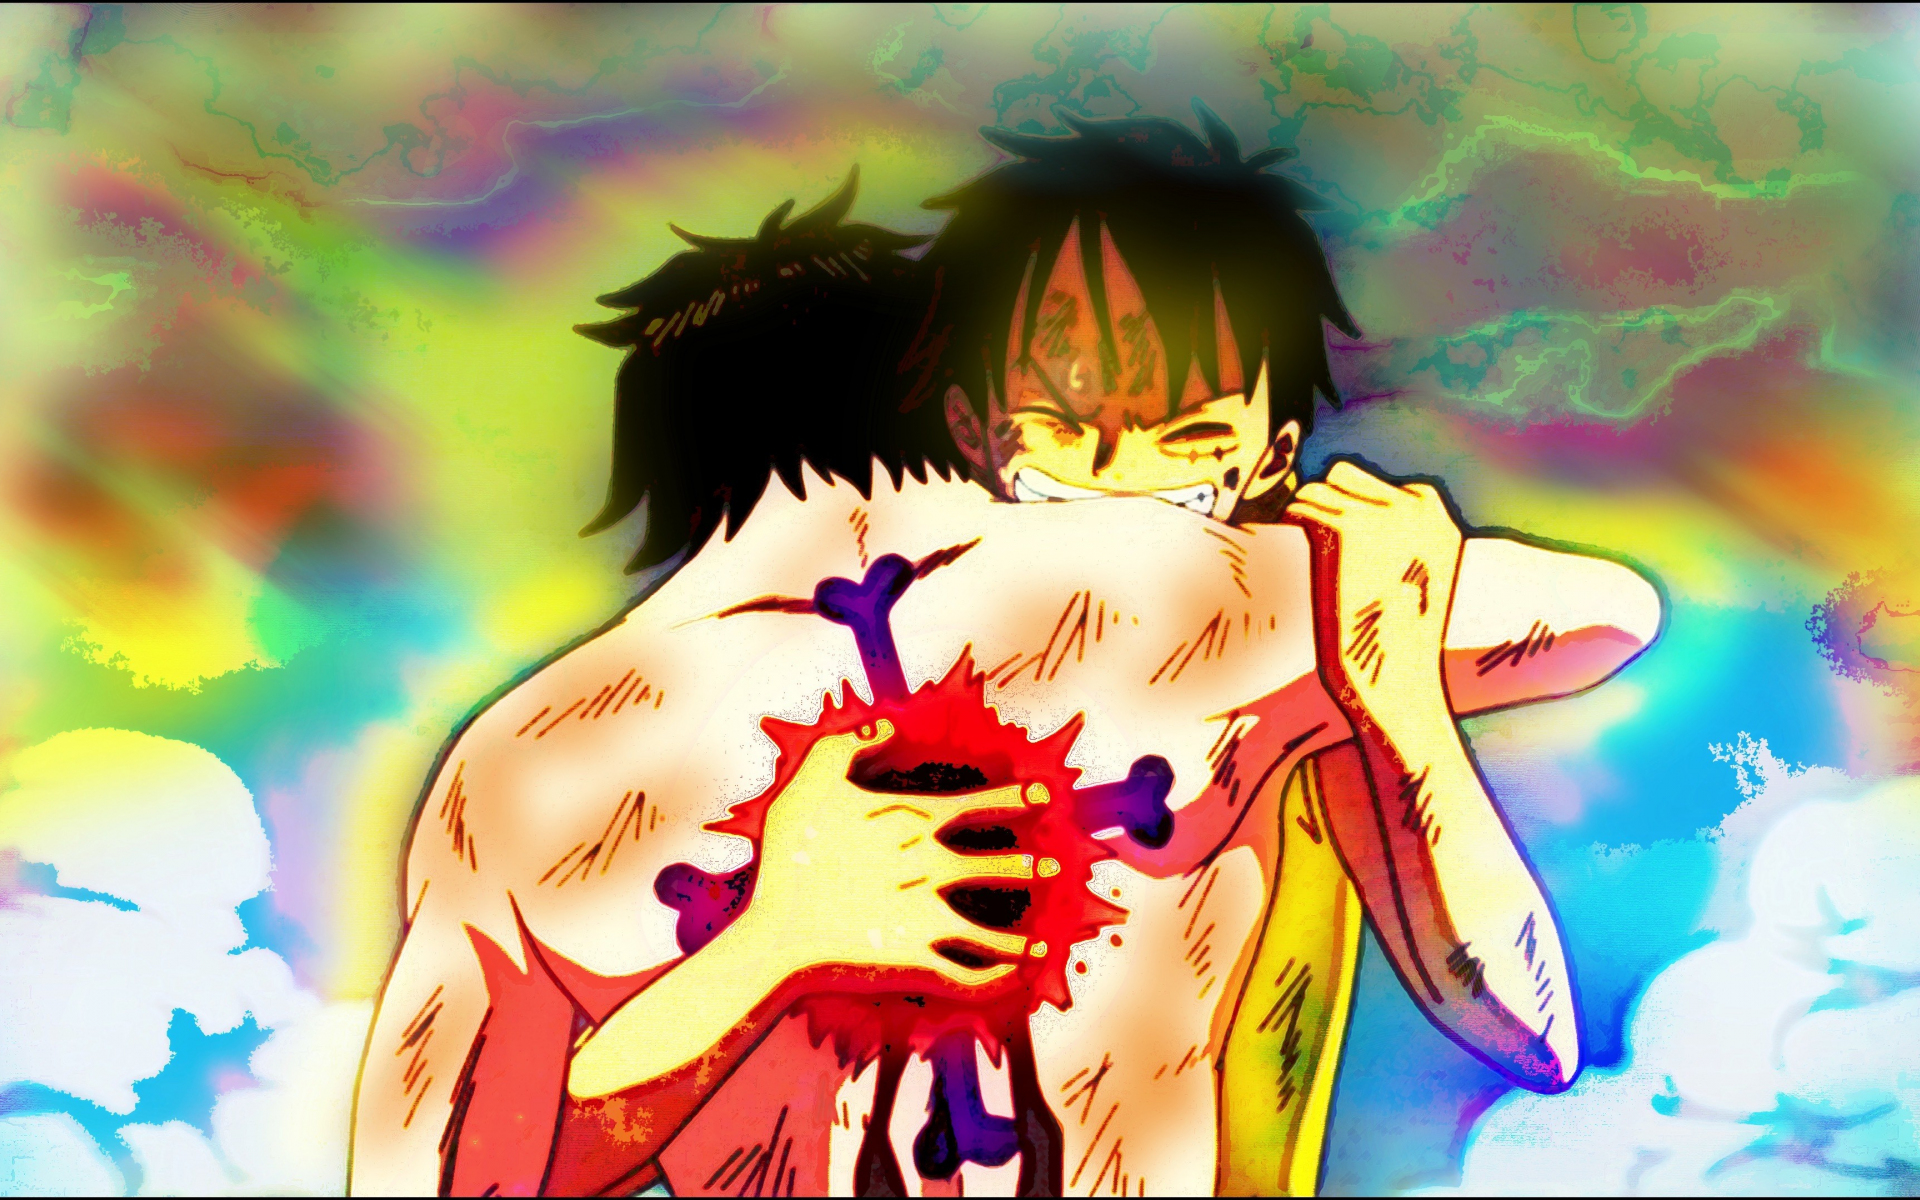 Monkey D Luffy Portgas D Ace Sabo Donquixote Doflamingo One Piece ace  chibi computer Wallpaper fictional Character png  PNGWing